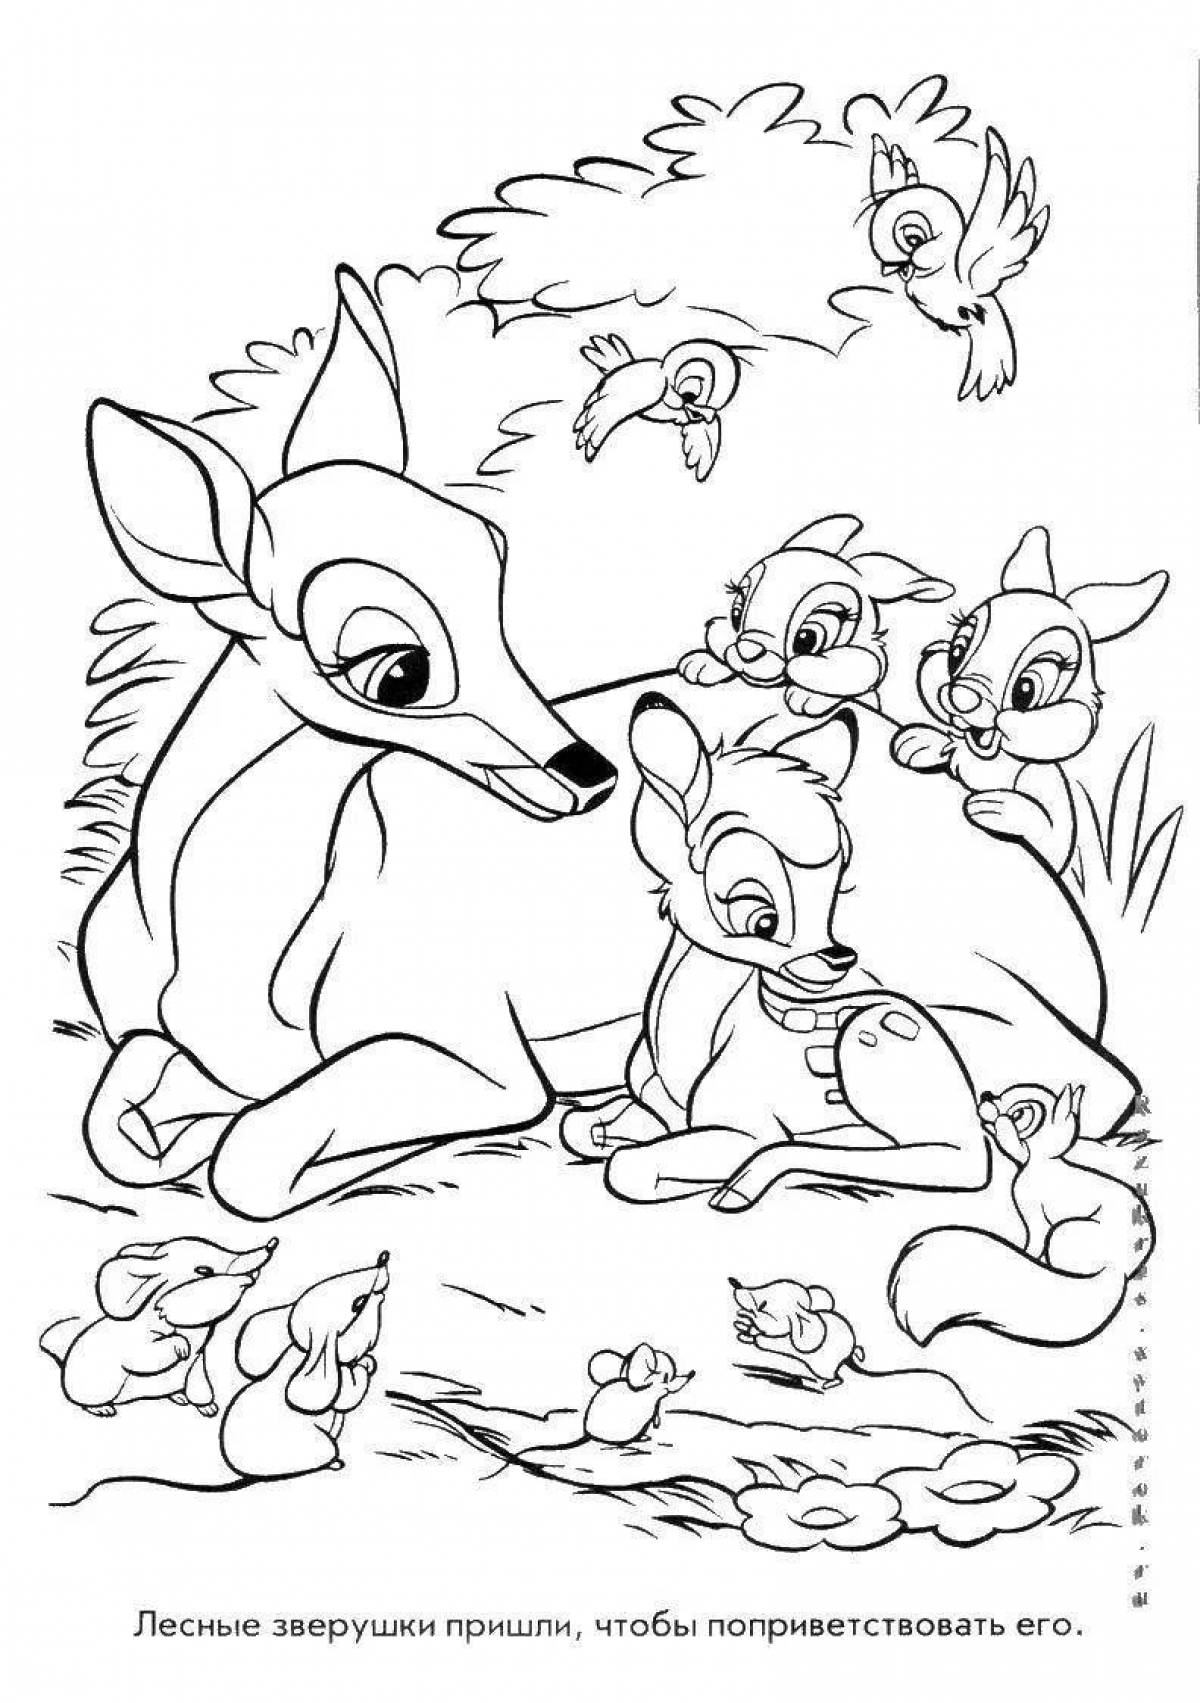 Amazing bambi coloring book for kids 3-4 years old